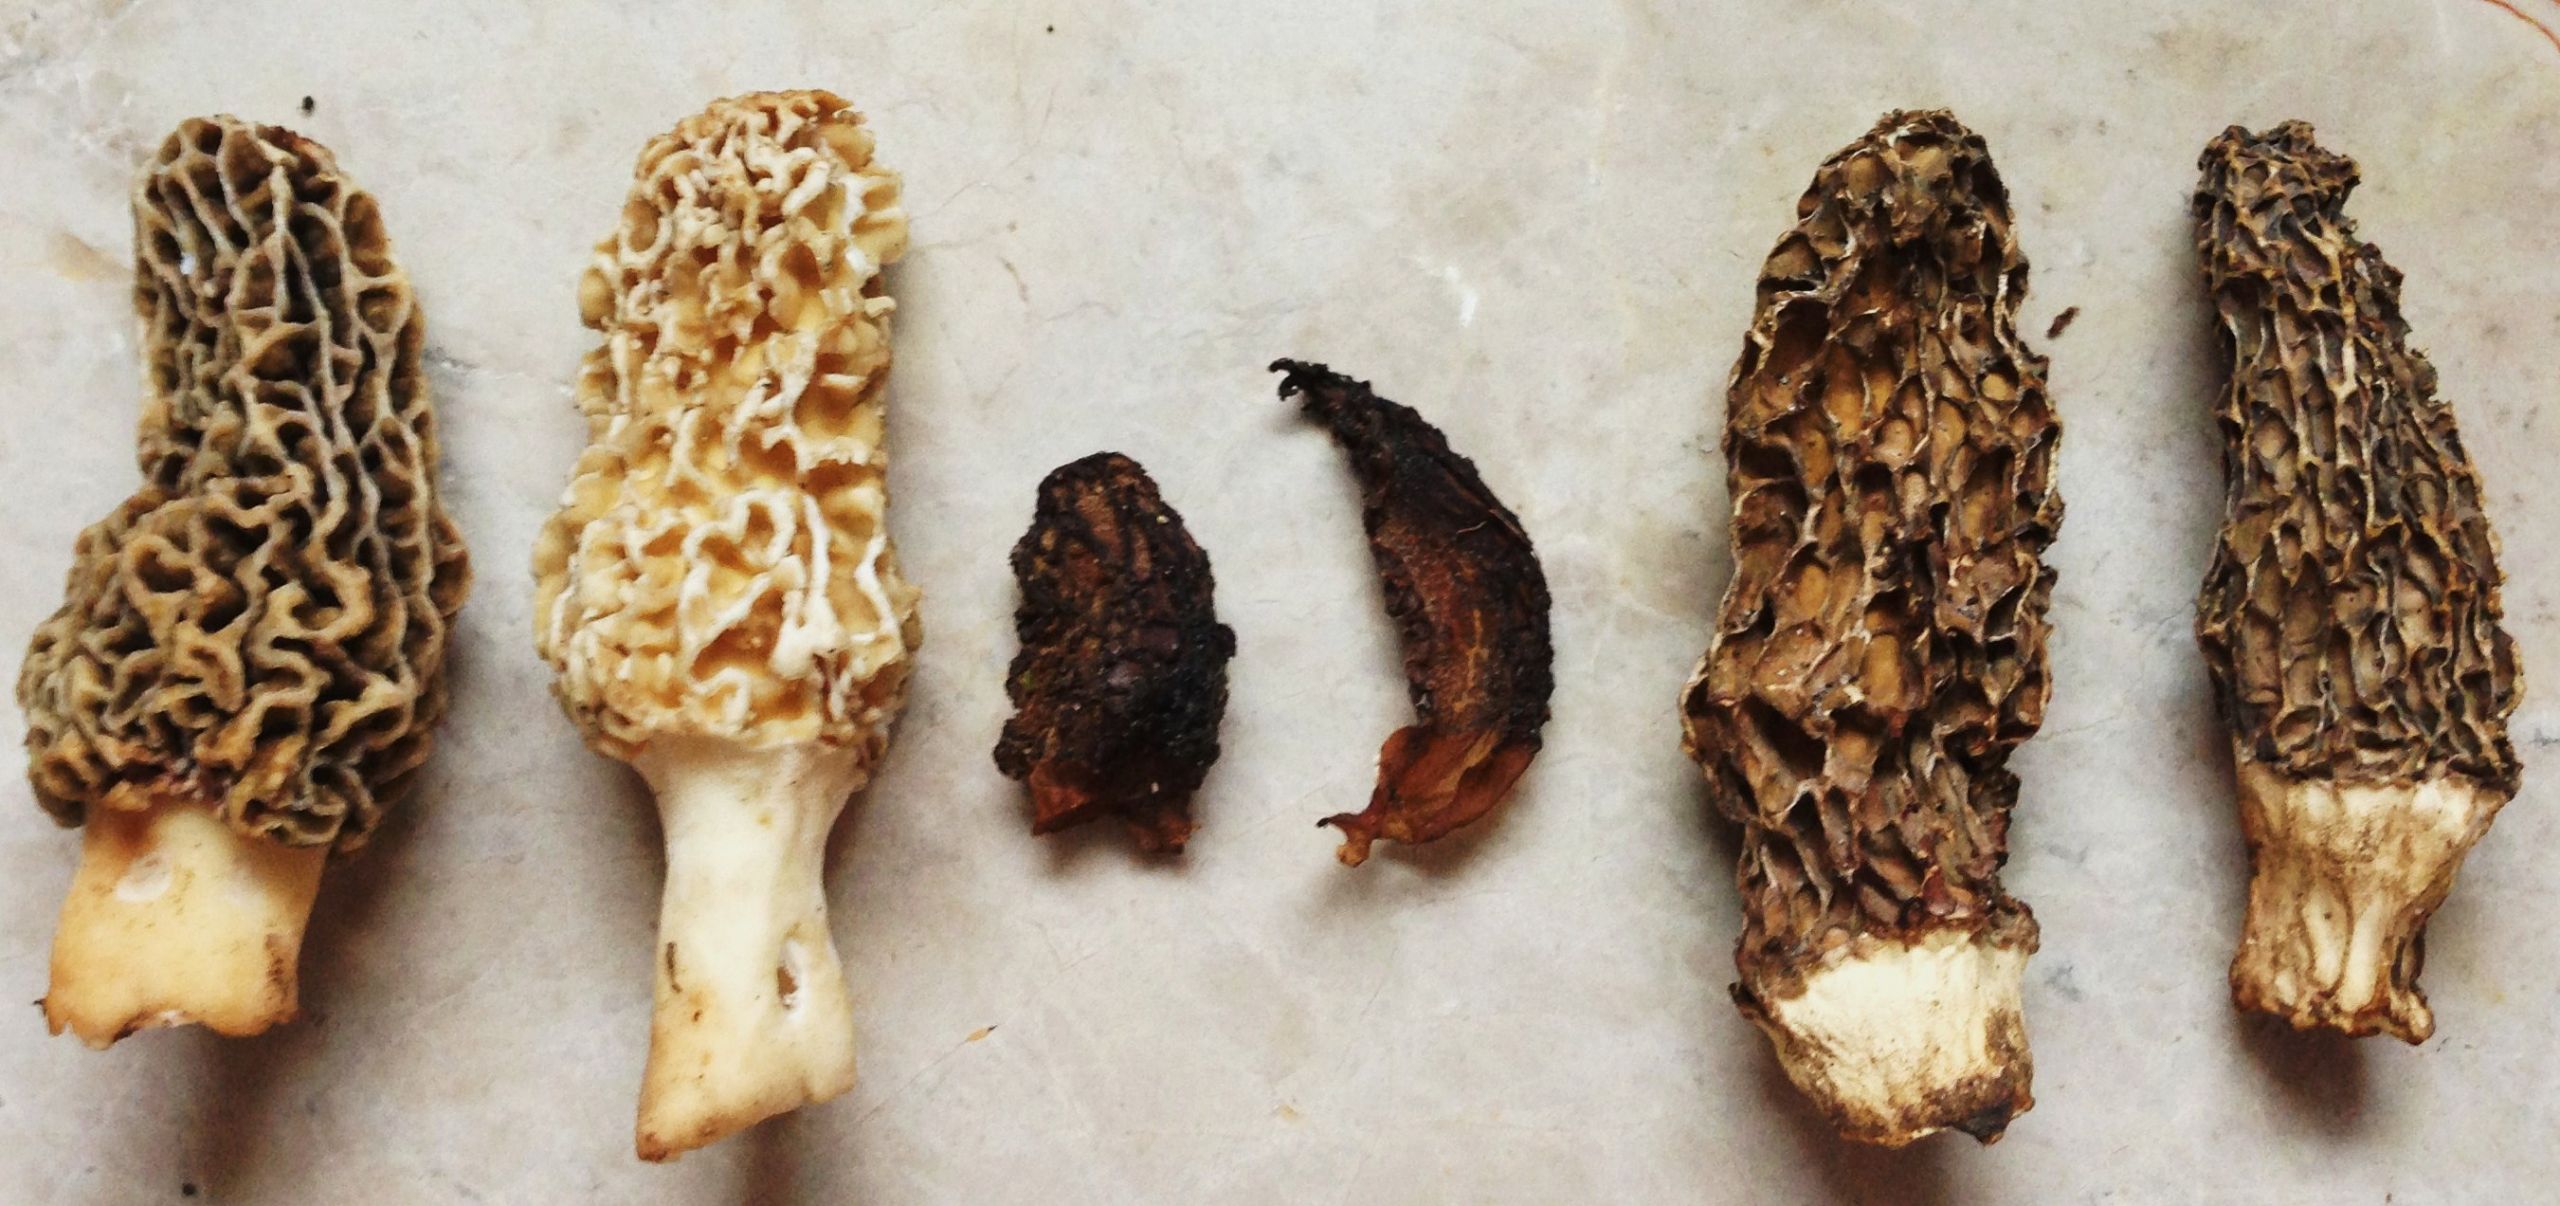 Dehydrating Morel Mushrooms
 How to Dry or Dehydrate Wild Mushrooms